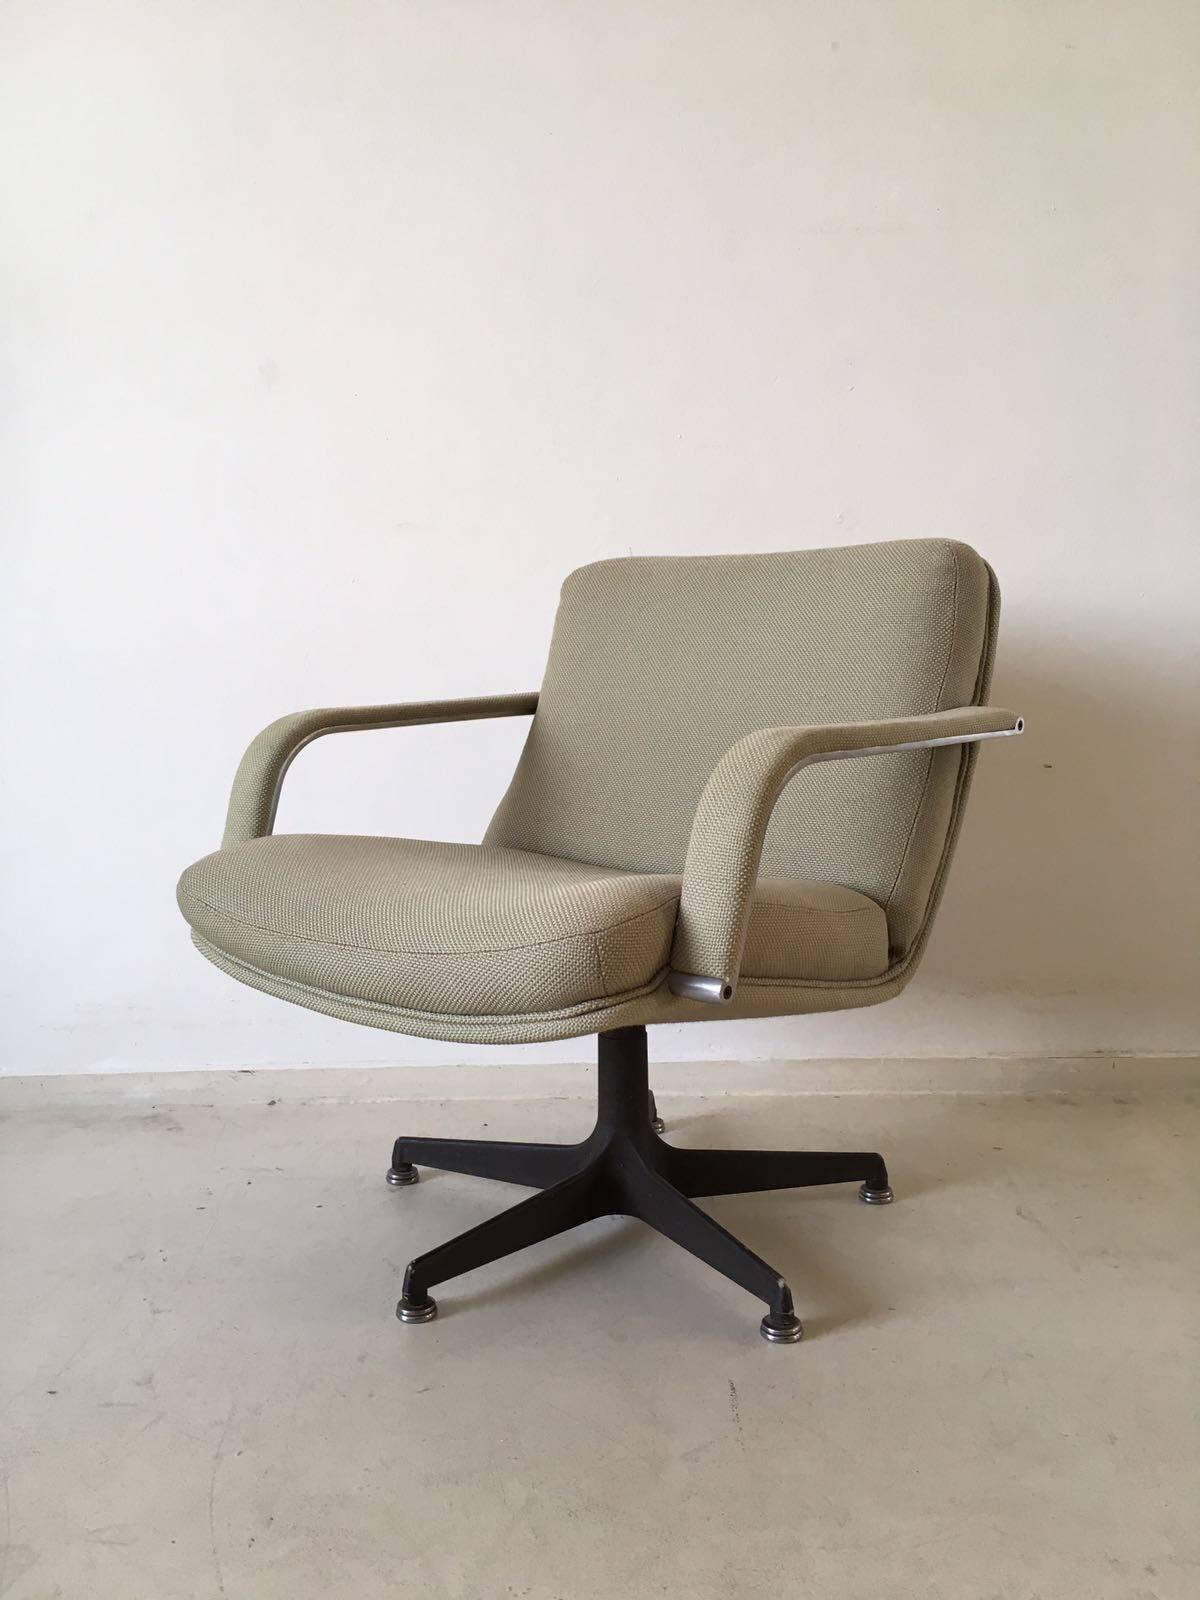 Original 1970s Dutch swivel lounge chair by Geoffrey Harcourt for Artifort. The chair in very good condition and sits very comfortable. The chair features the original wool upholstery and rotative black metal star-foot. 

It remains in a good